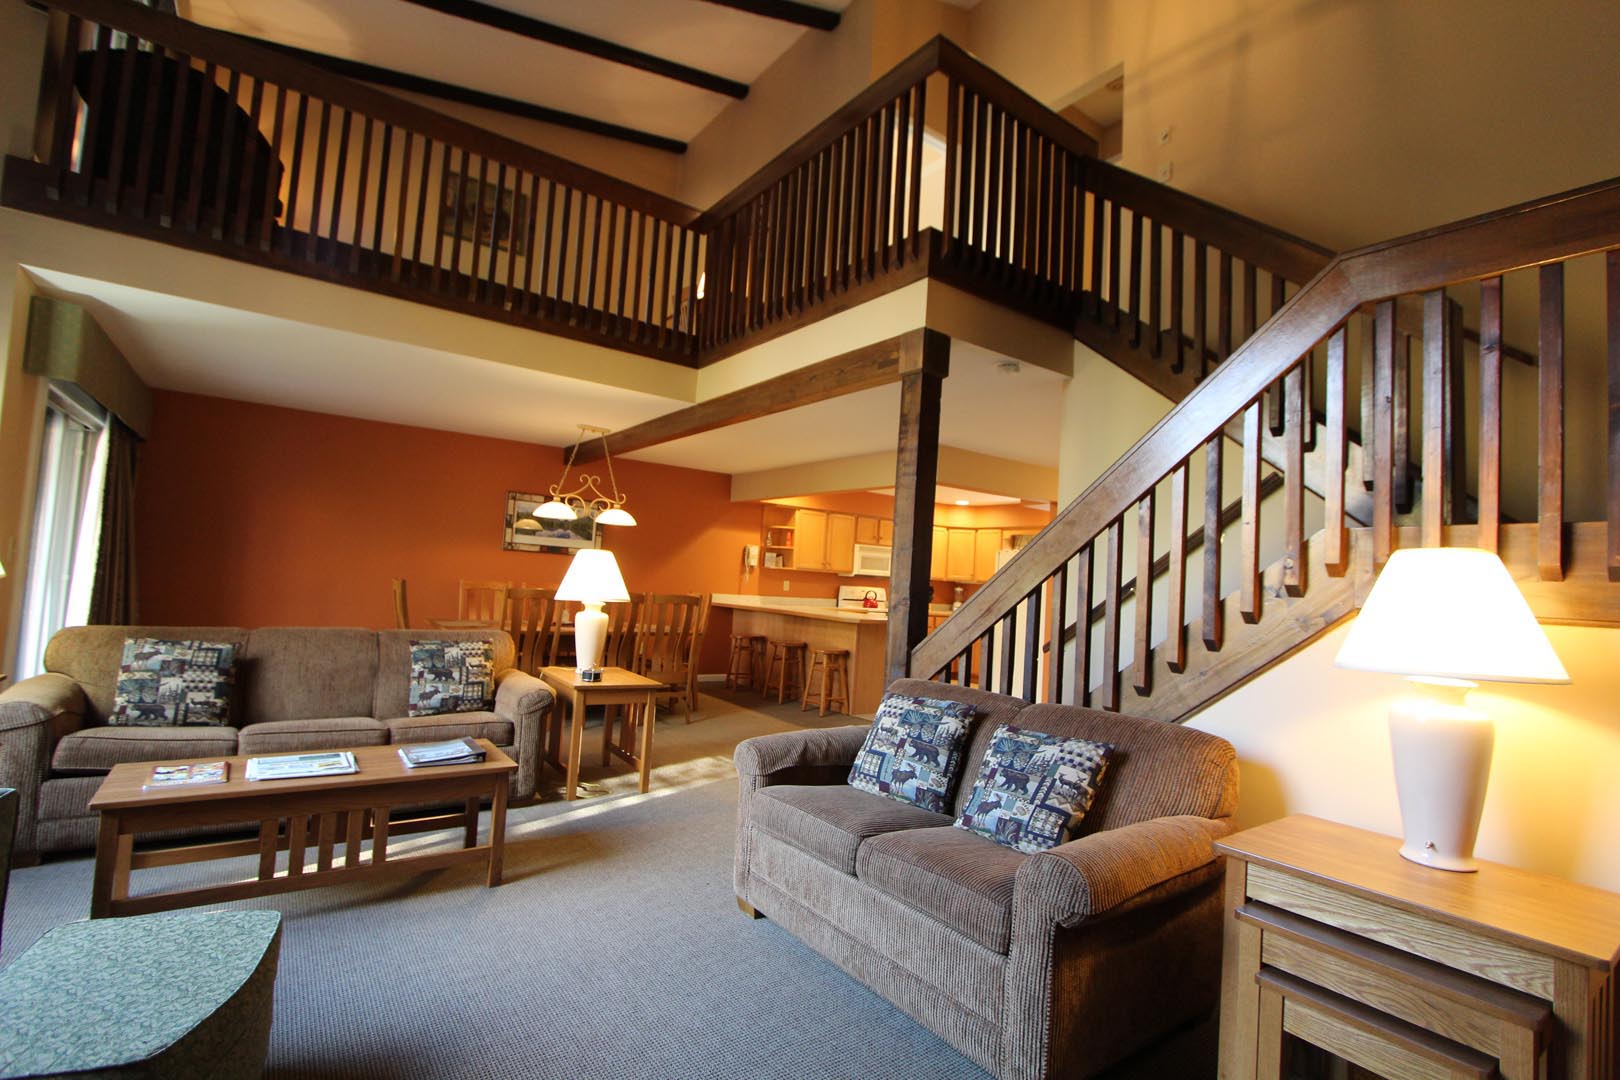 A interior view of the two story unit at VRI's Lake Placid Club Lodges in New York.